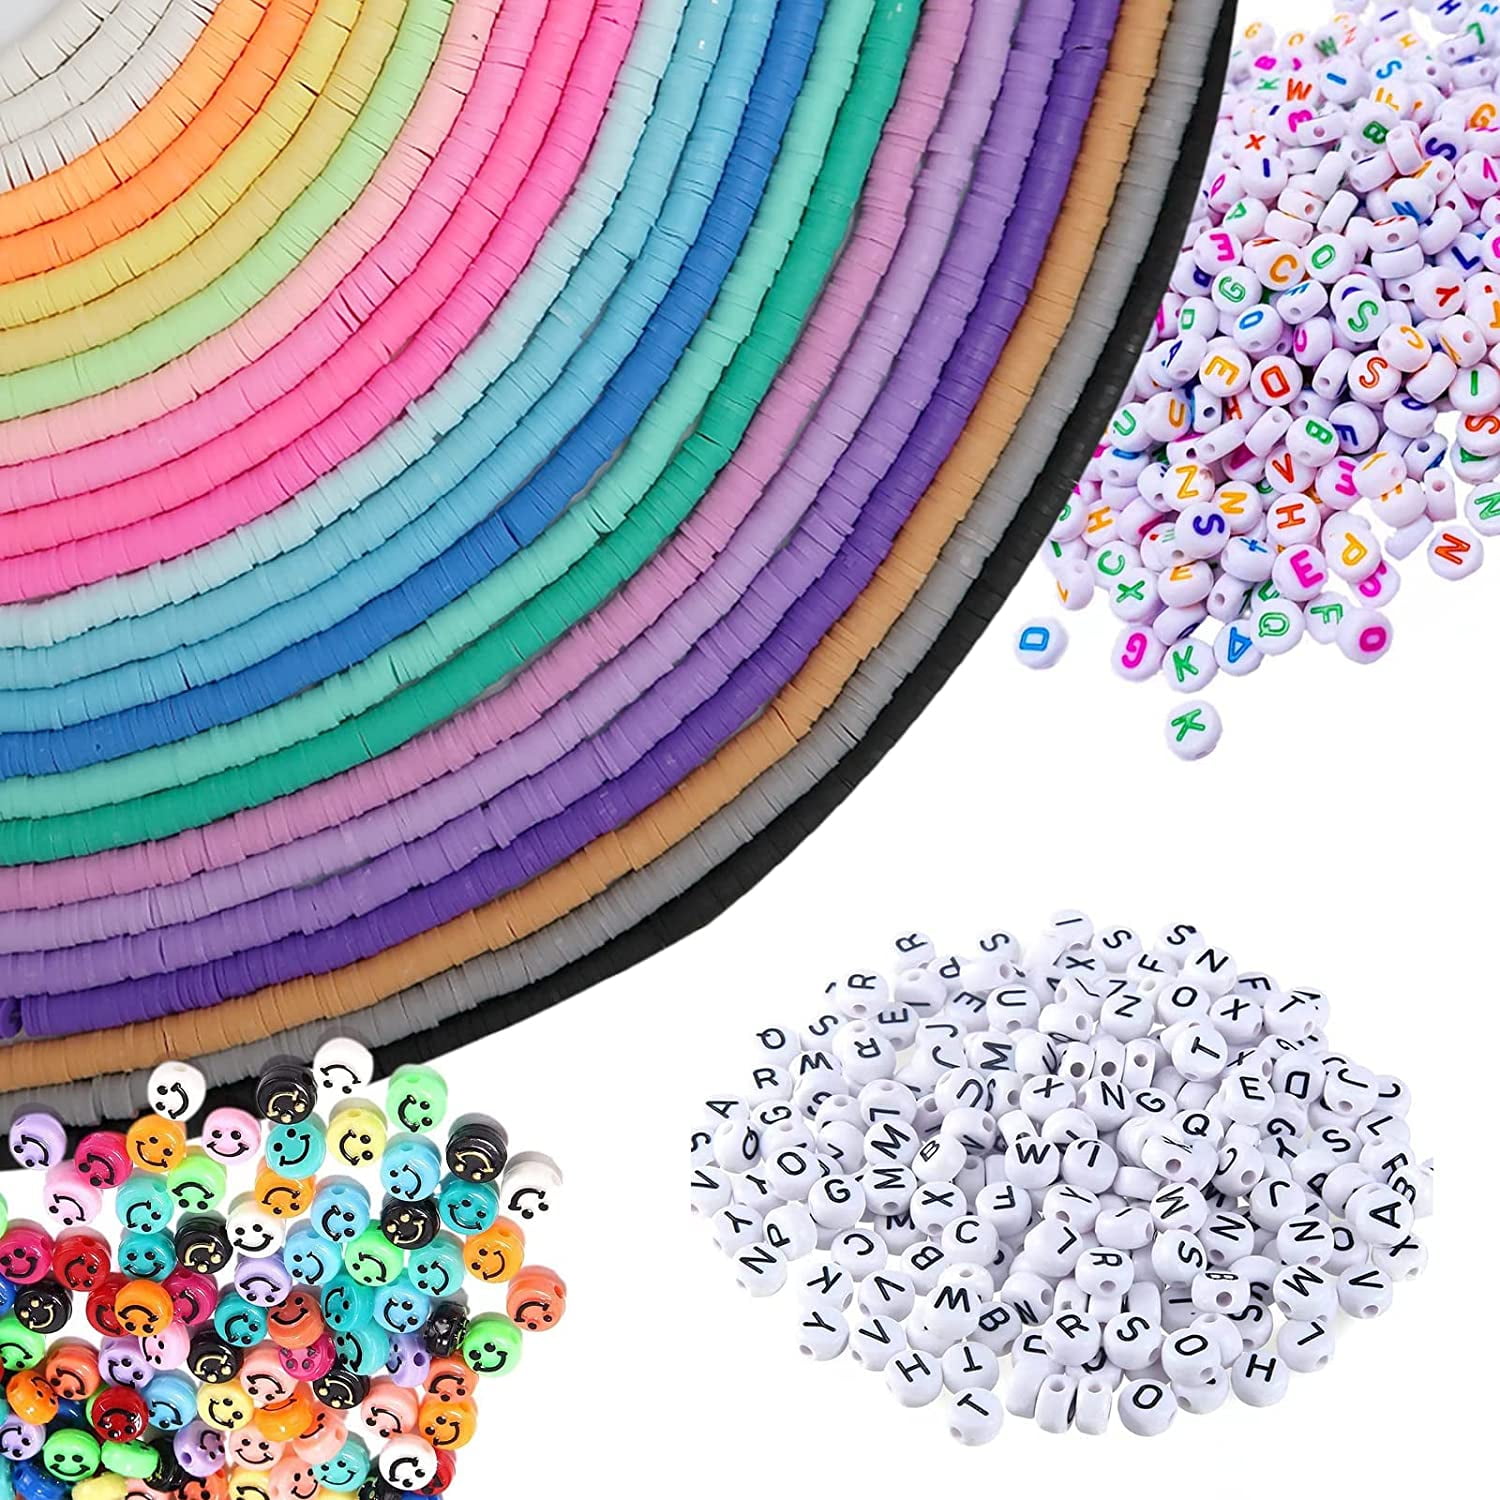 Hello Hobby Pony Beads, Candy-Colored, 500-Pack, Boys and Girls, Child,  Ages 6+